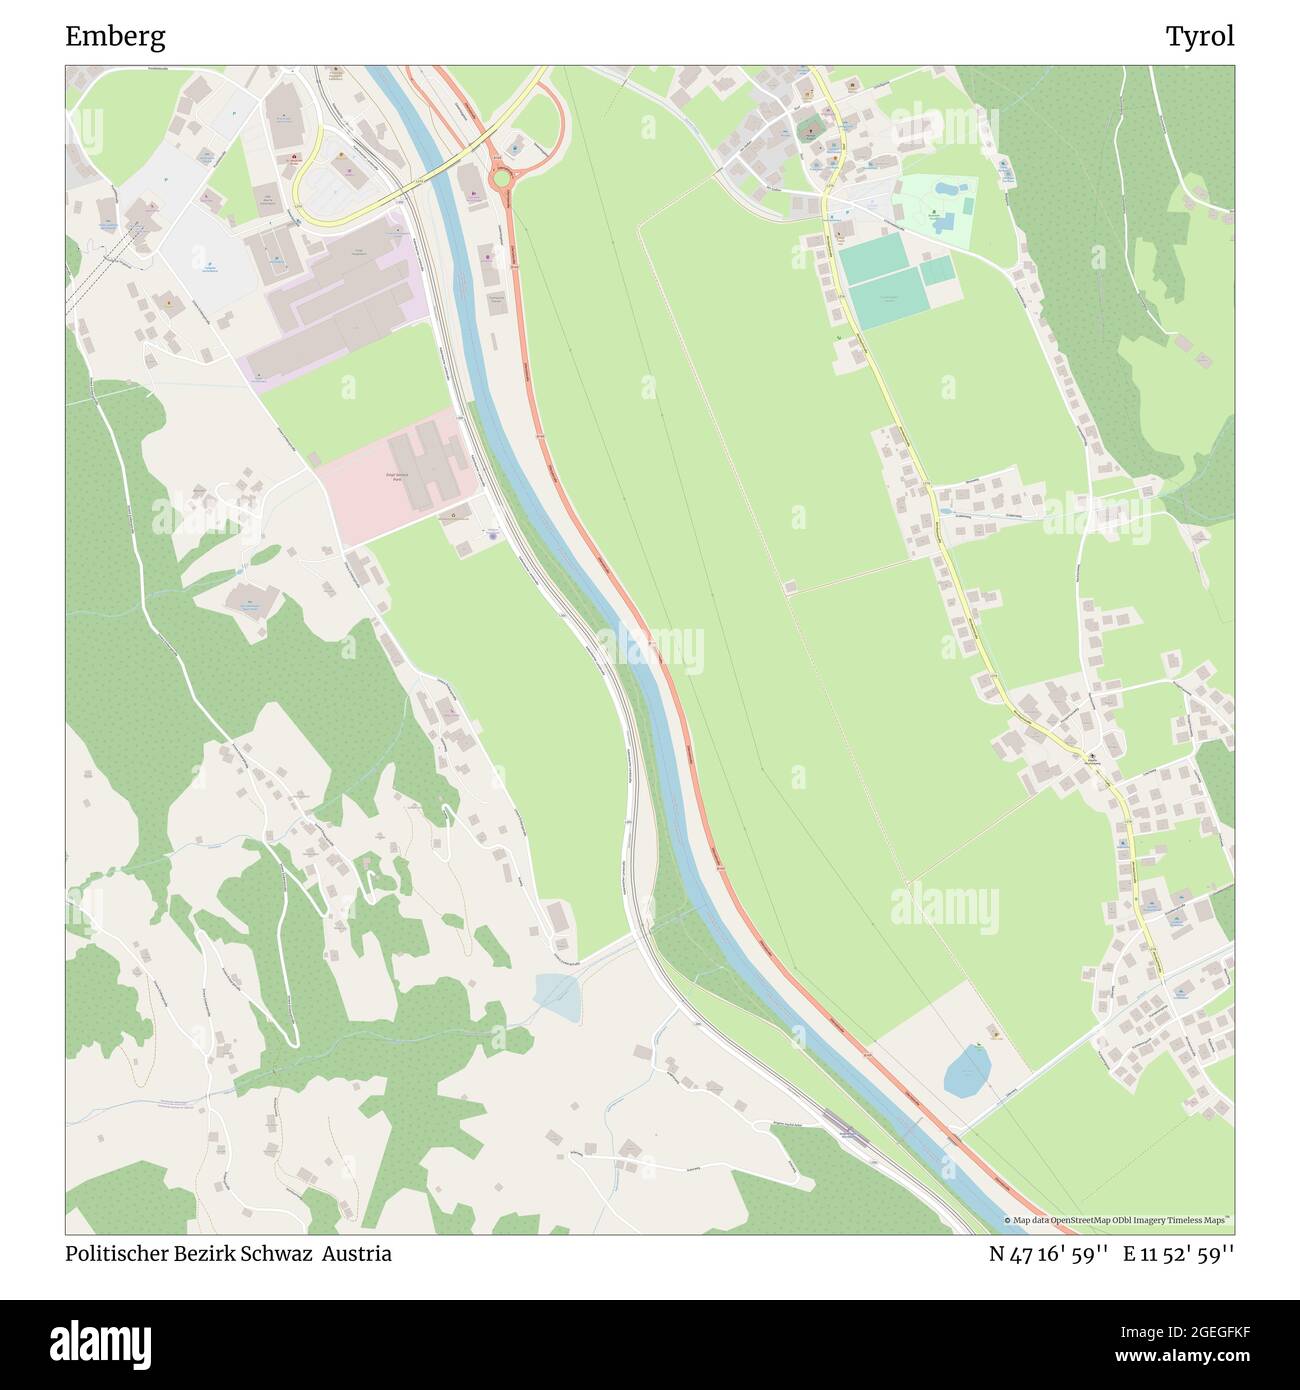 Emberg, Politischer Bezirk Schwaz, Austria, Tyrol, N 47 16' 59'', E 11 52' 59'', map, Timeless Map published in 2021. Travelers, explorers and adventurers like Florence Nightingale, David Livingstone, Ernest Shackleton, Lewis and Clark and Sherlock Holmes relied on maps to plan travels to the world's most remote corners, Timeless Maps is mapping most locations on the globe, showing the achievement of great dreams Stock Photo